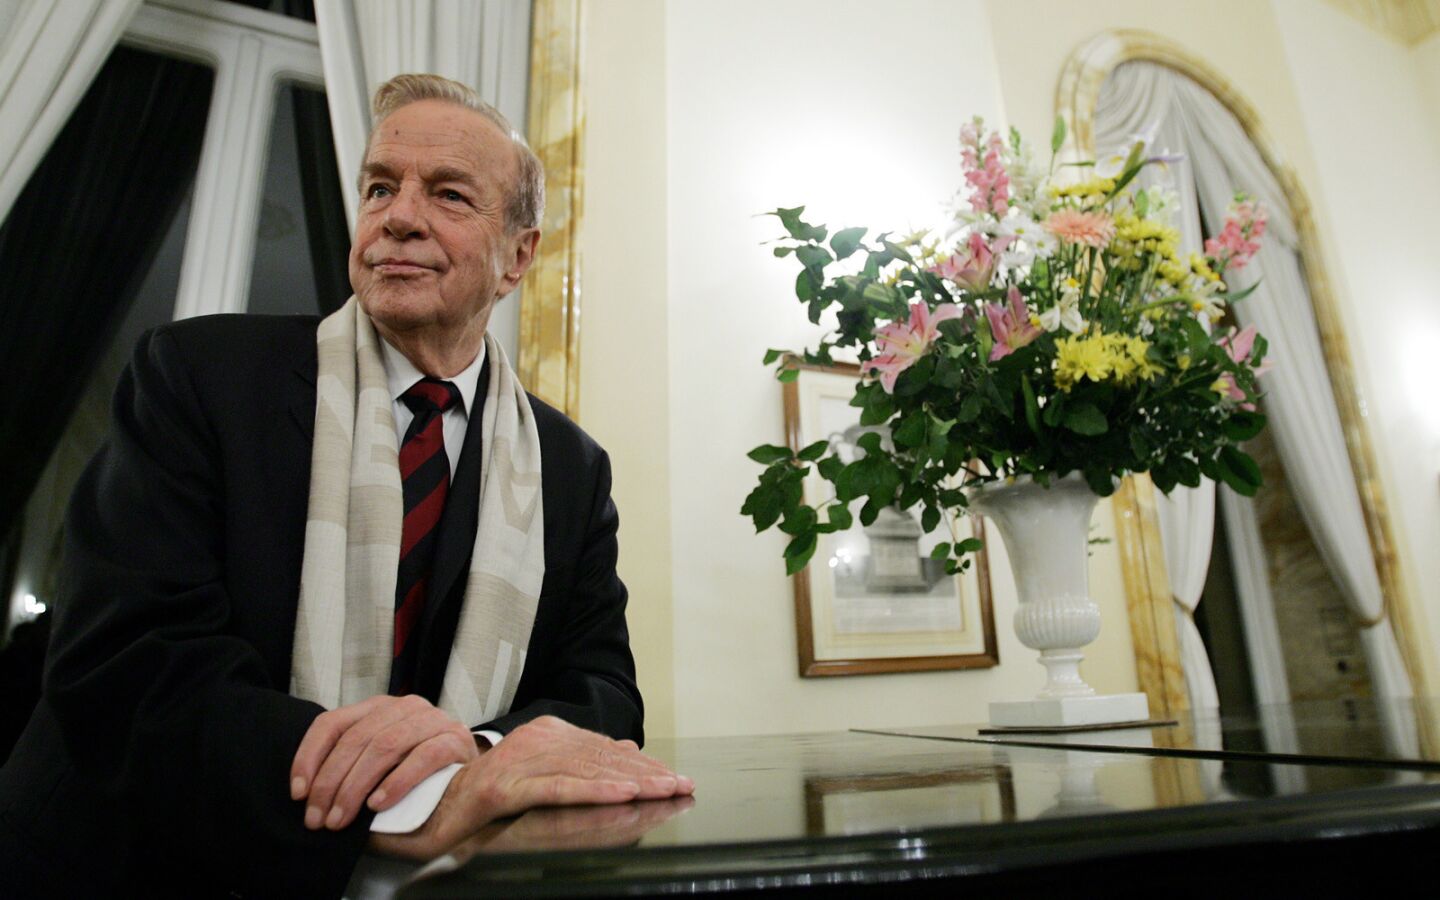 Italian director Franco Zeffirelli was best-known for his films, including the 1968 critical and box office hit “Romeo and Juliet” and a 1990 “Hamlet” with Mel Gibson. His massive opera productions included a version of Puccini’s “La Boheme” that became the most-often presented production in the Metropolitan Opera’s history. He was 96.